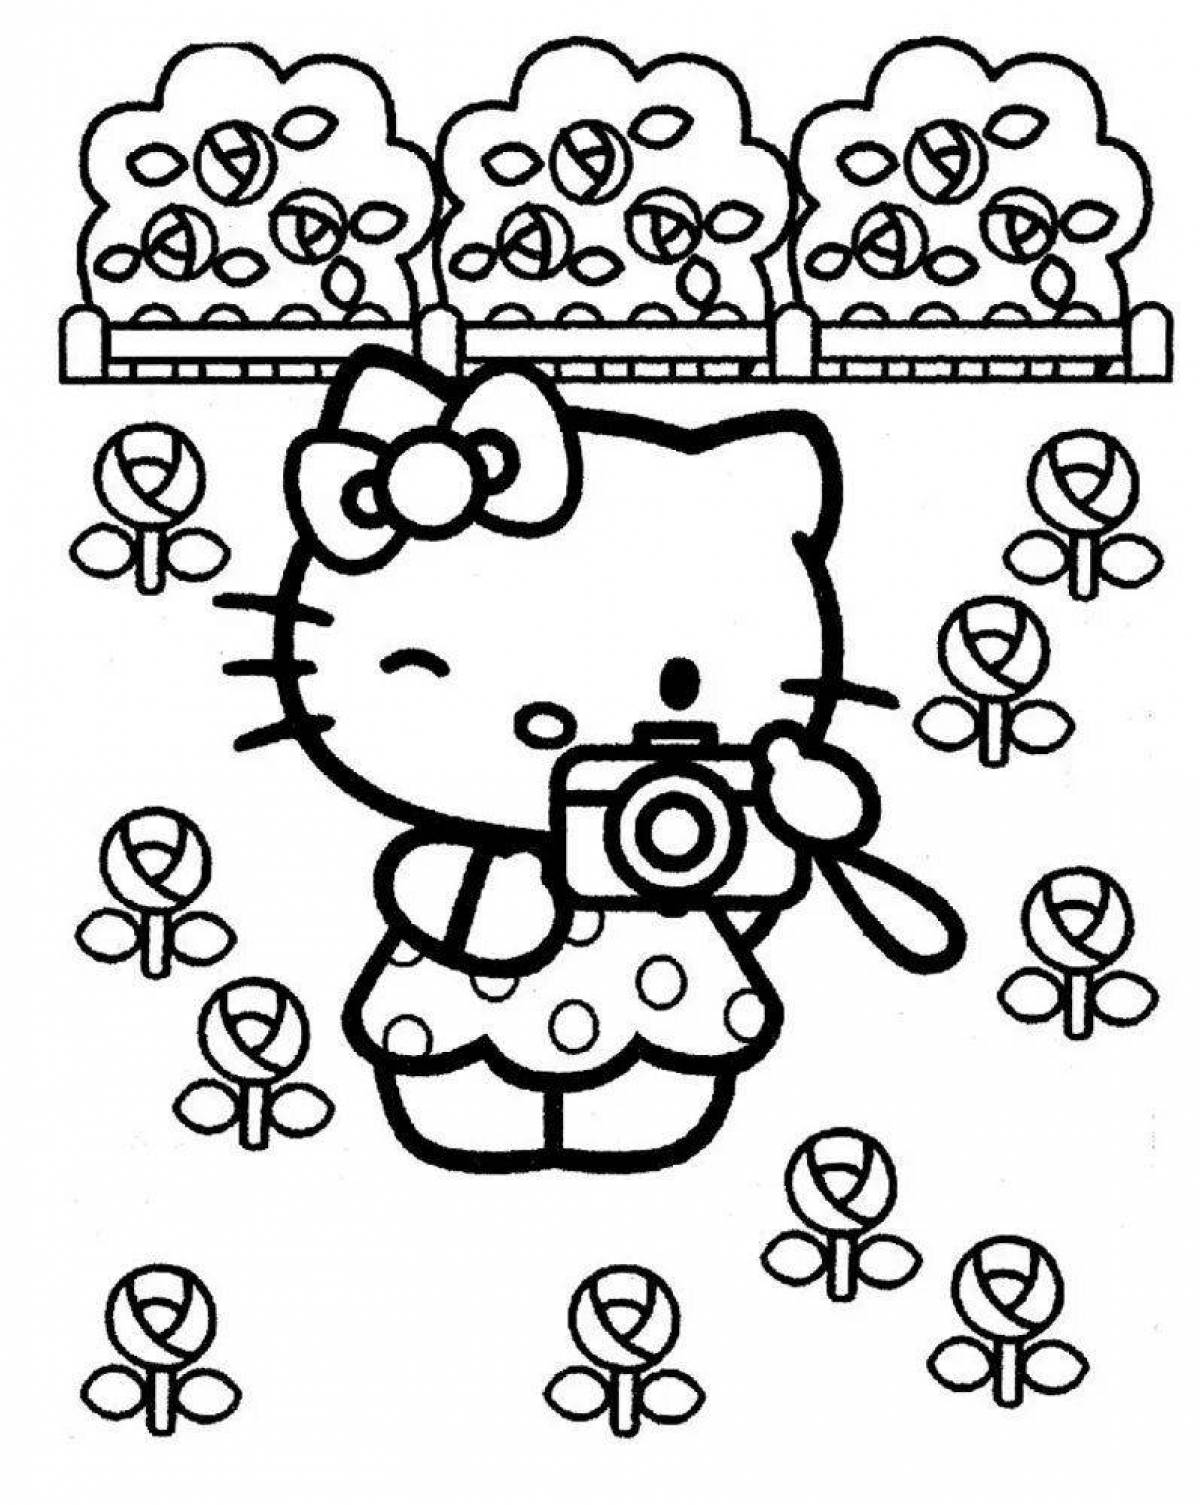 Great hello kitty coloring book